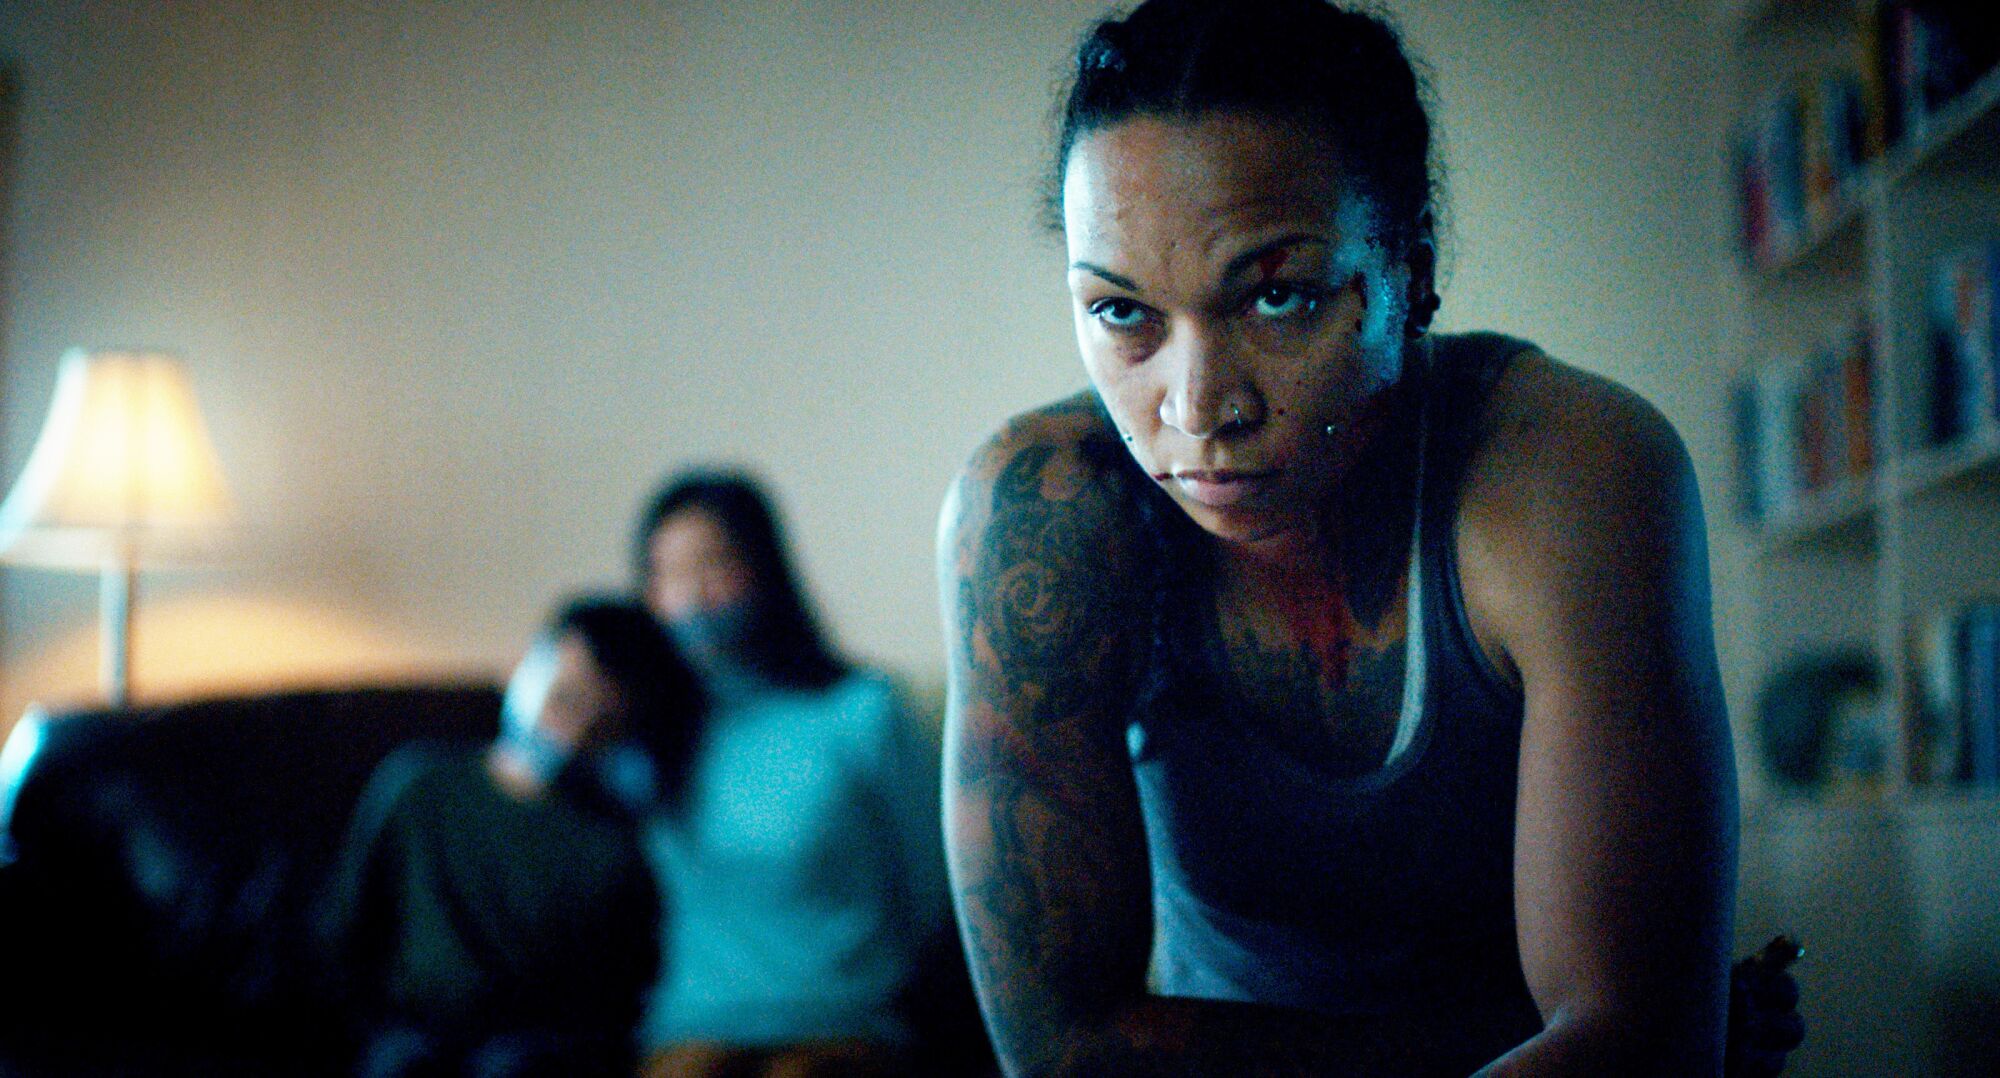 A closeup of a tattooed woman staring intently at the camera, with two people out of focus seated behind her.